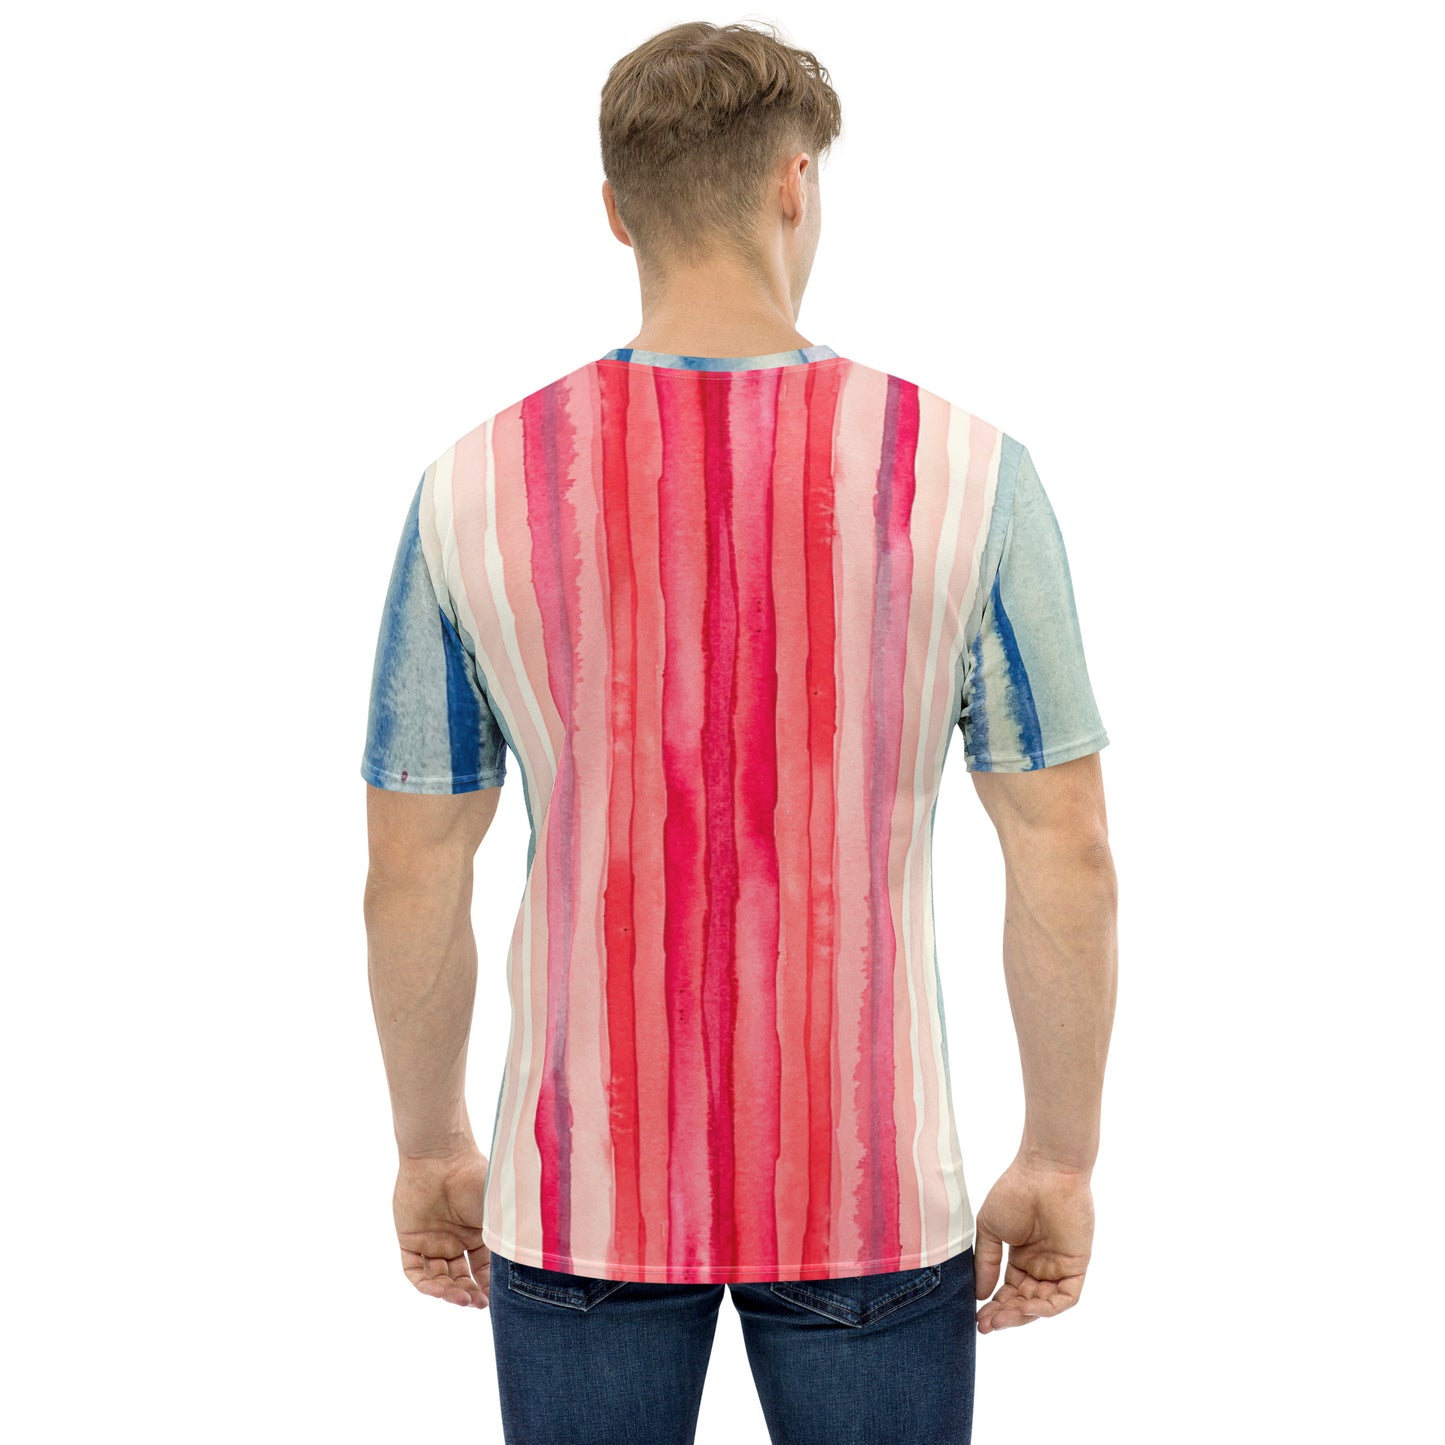 Men's Climate Stripes All over t-shirt